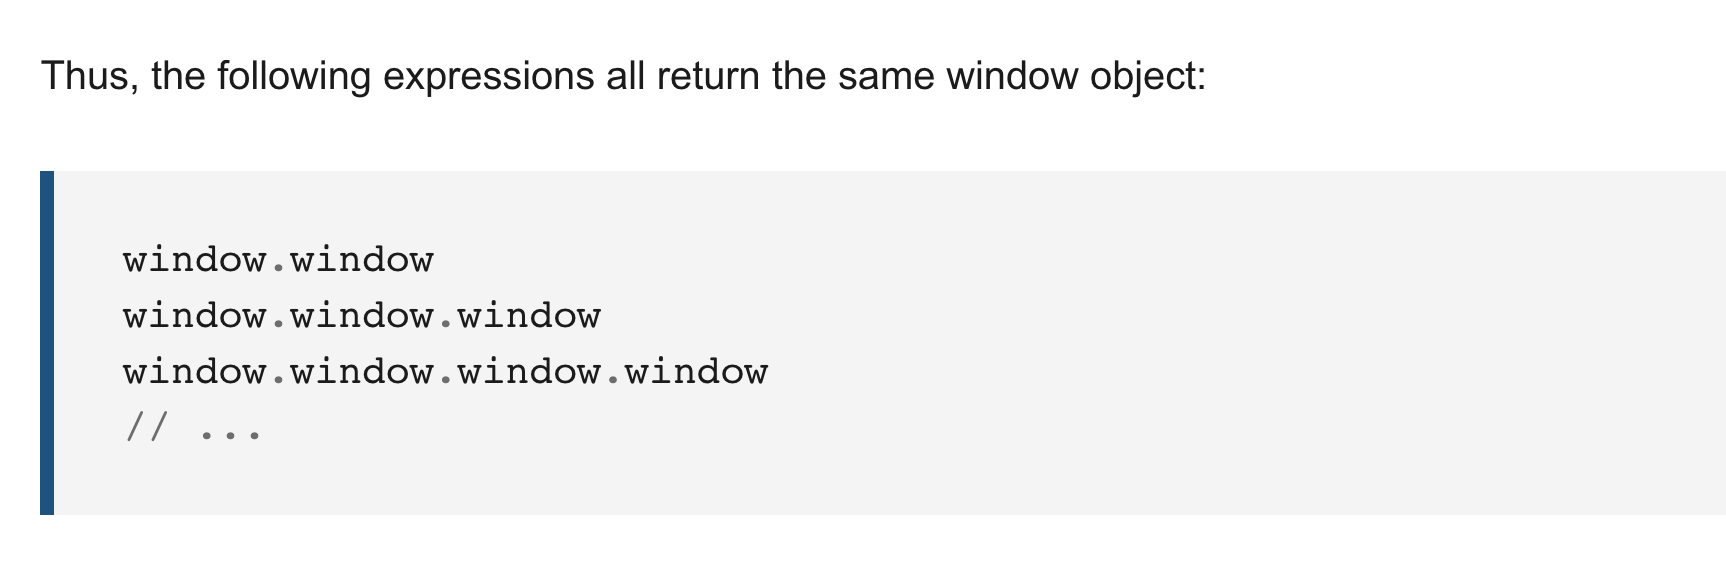 Thus, the following expressions all return the same window object:  window.window; window.window.window; window.window.window.window;